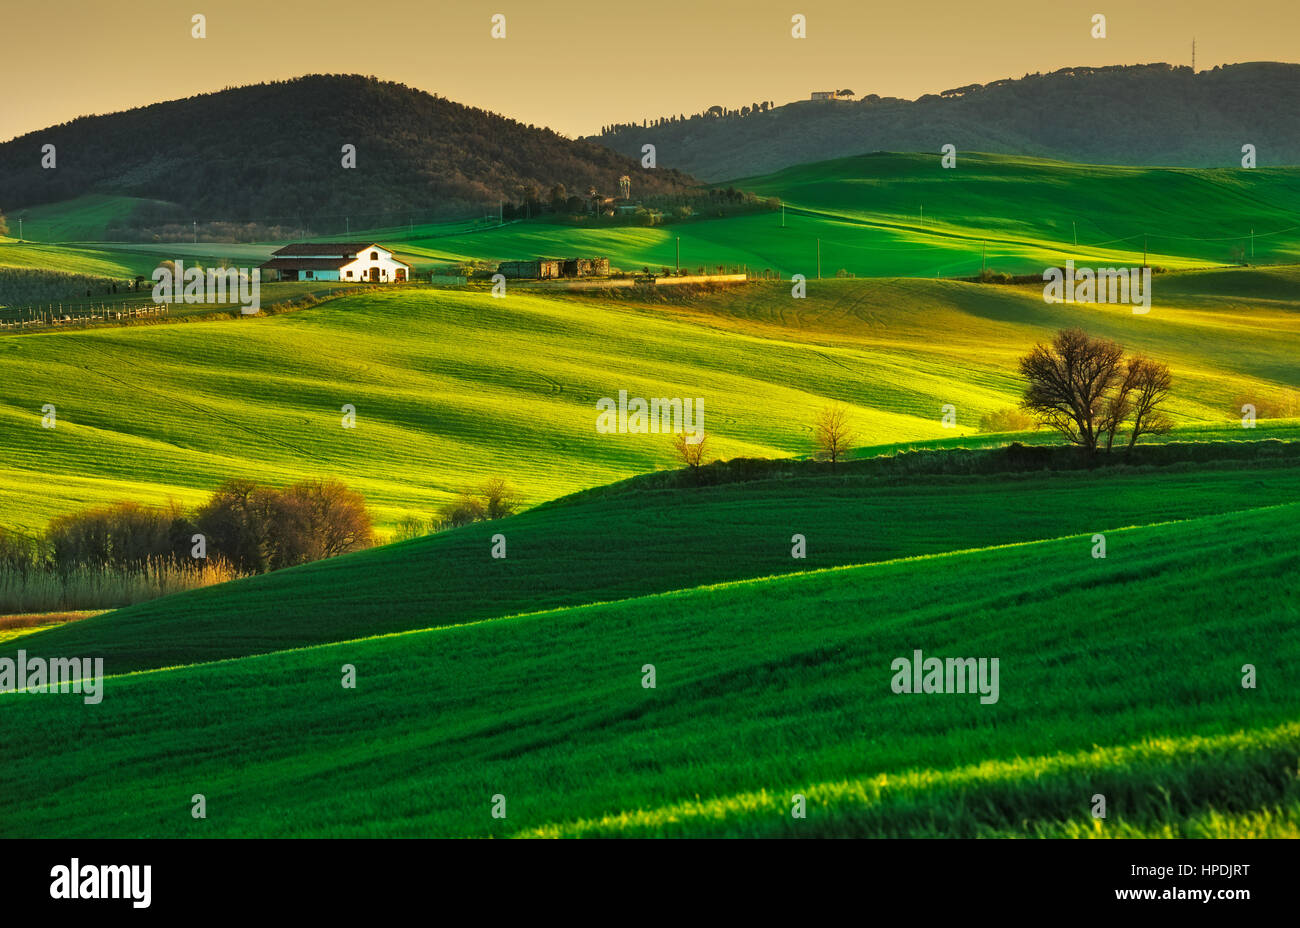 Tuscany, rolling hills on sunset. Volterra rural landscape. Green fields, farmland and trees. Italy Stock Photo